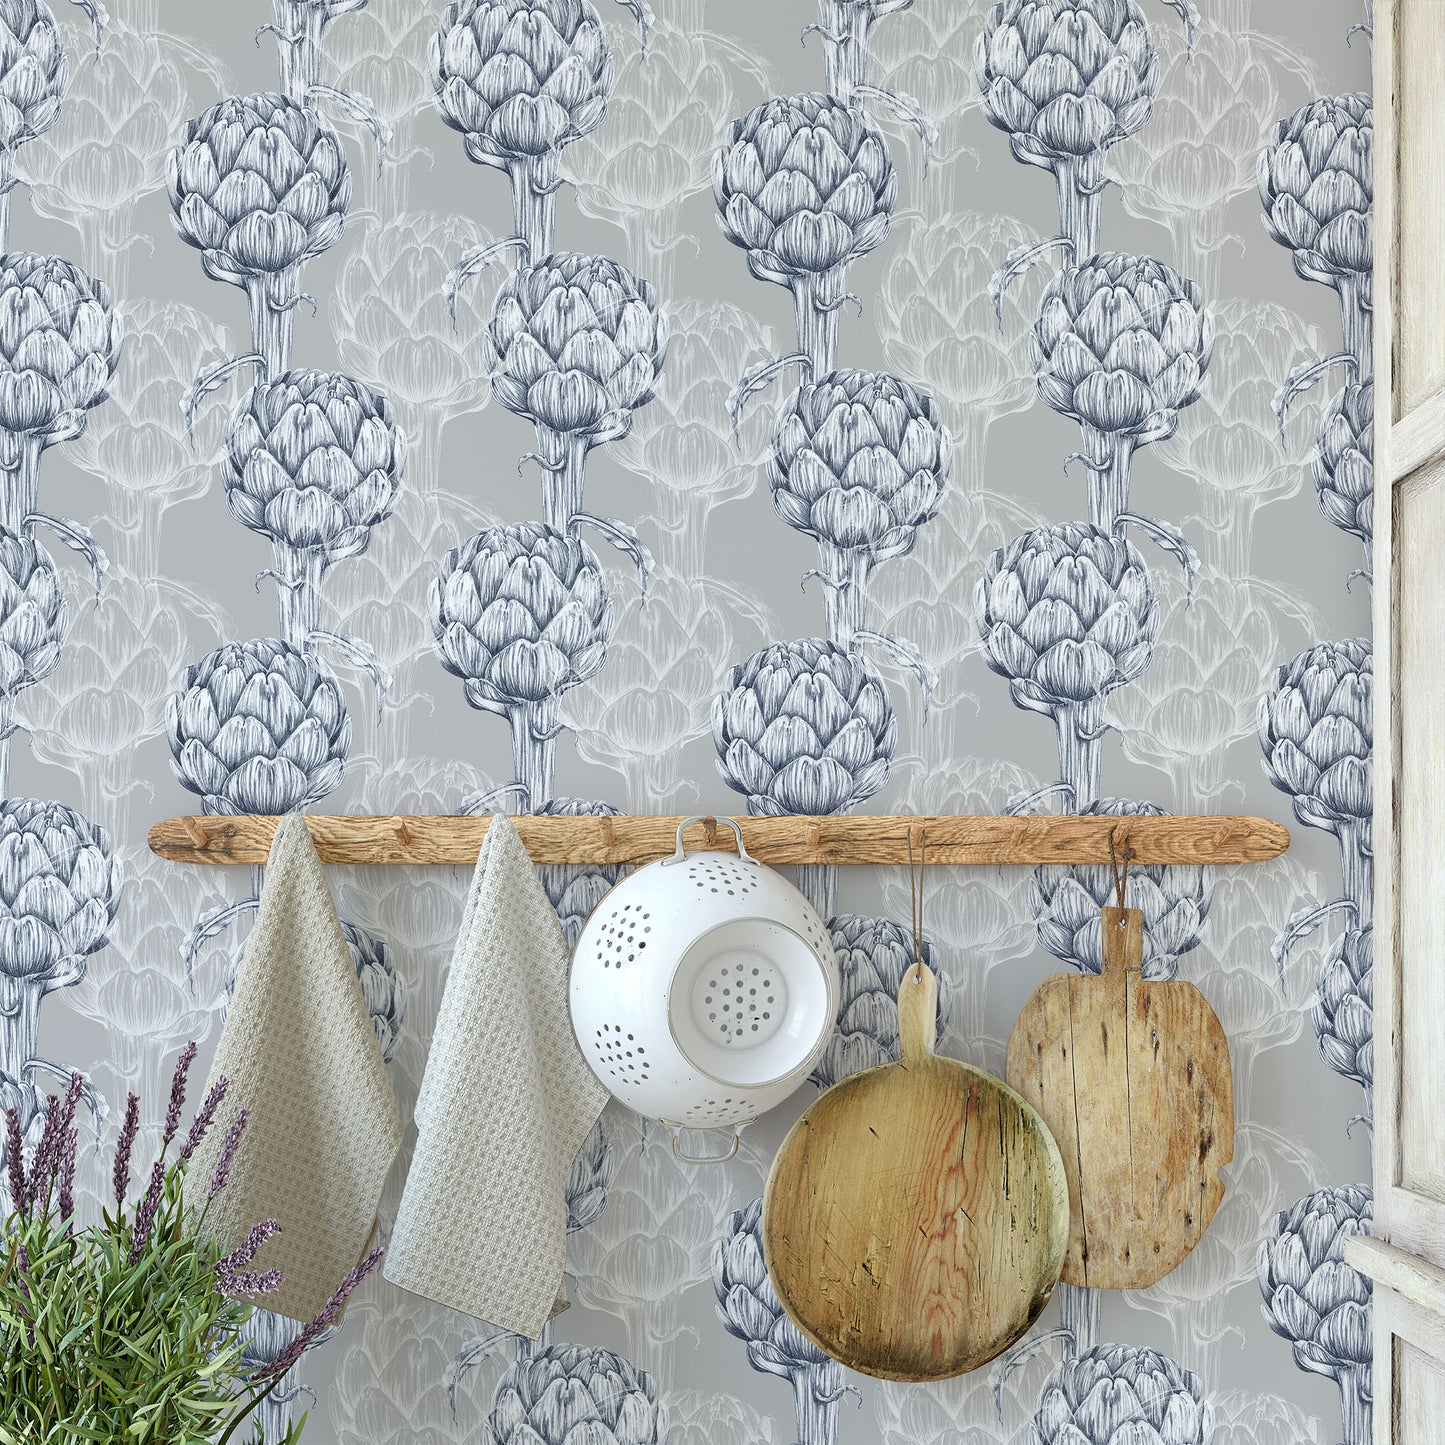 Blue and white artichoke with light grey/gray background easy to install and remove peel and stick custom wallpaper available in different lengths/sizes locally created and printed in Canada Artichoke wallpaper. Washable, durable, commercial grade, removable and waterproof. 